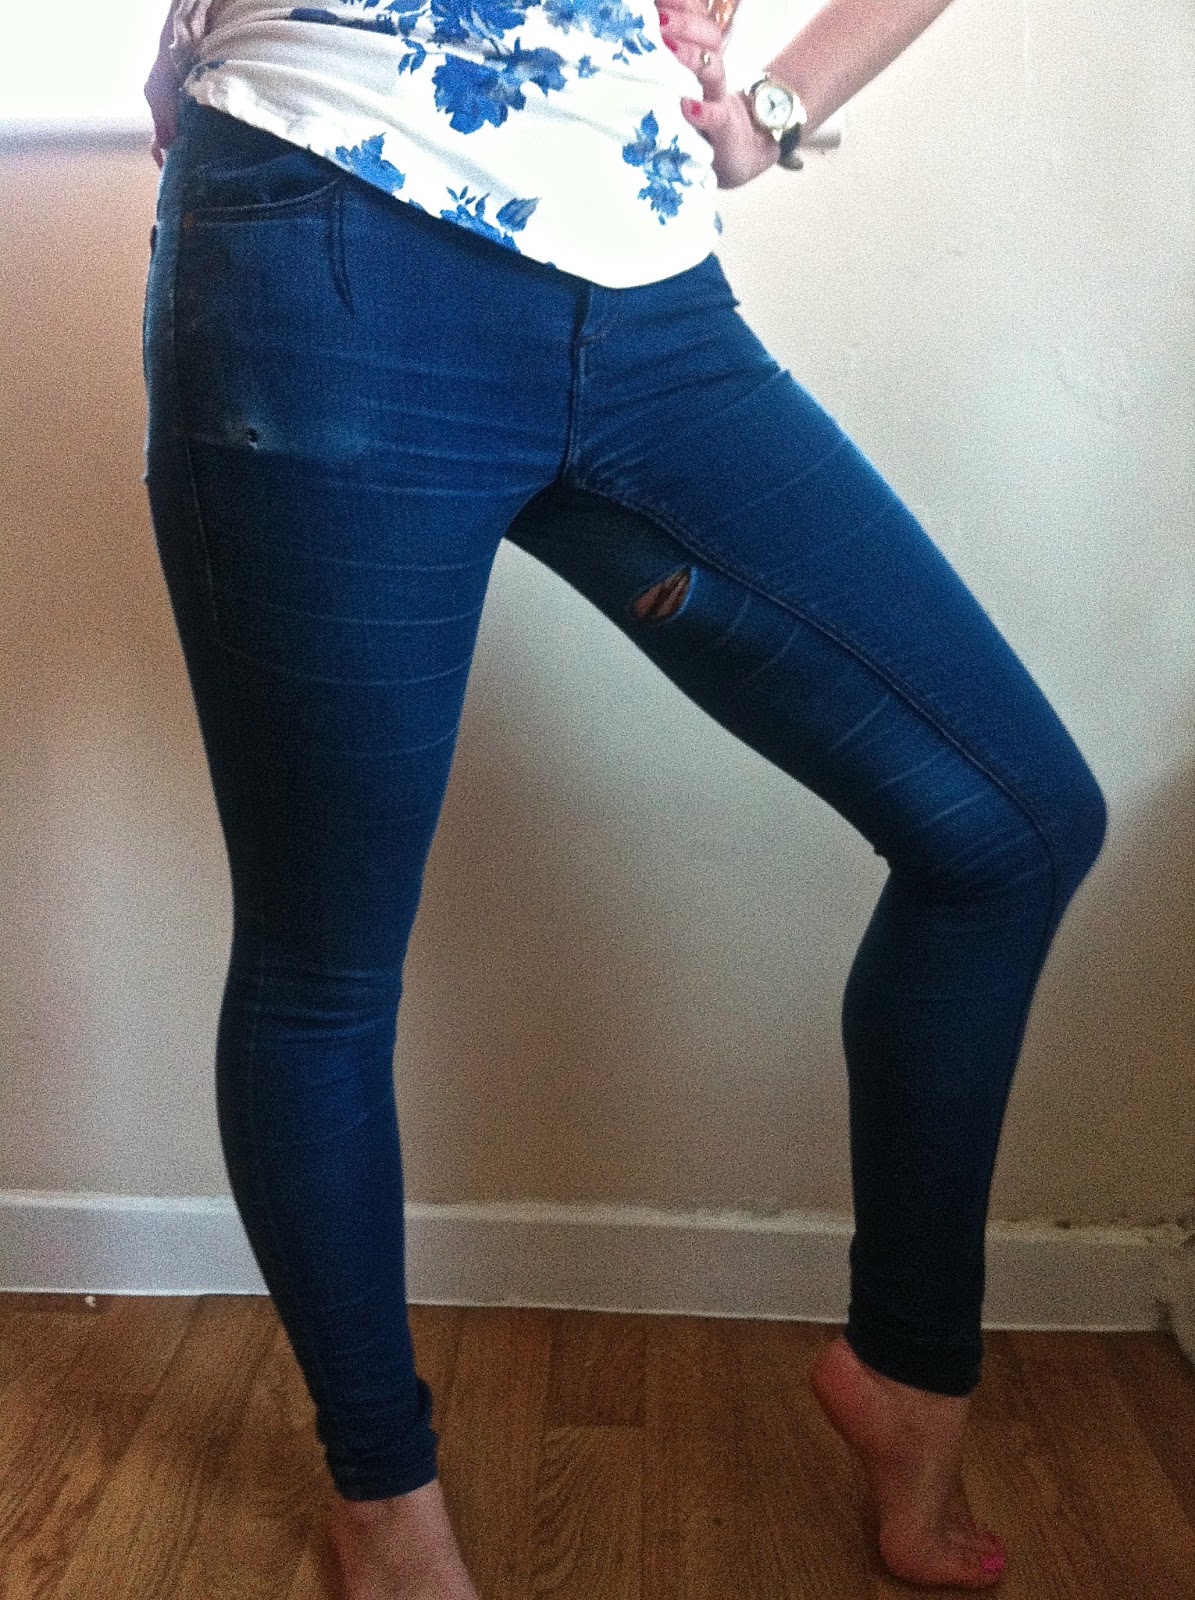 Beauty Days: TOPSHOP Leigh Jeans: A Love/Hate Relationship